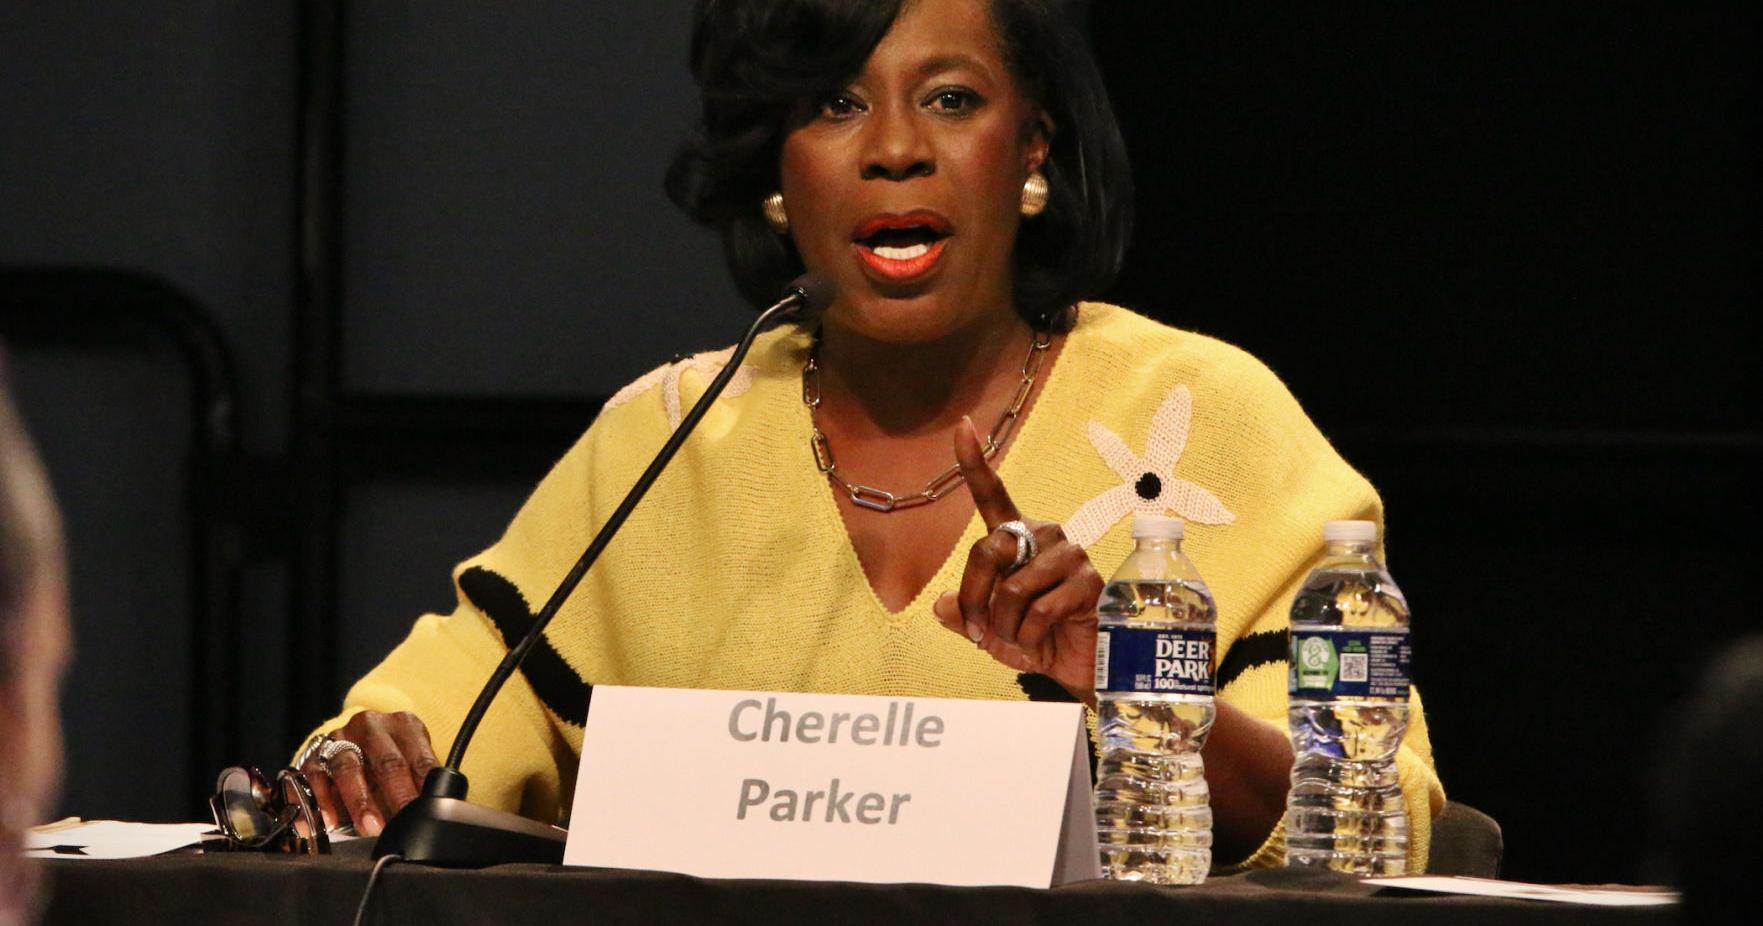 Democratic mayoral nominee Cherelle Parker wants to strengthen police, lean on stops and searches to tackle gun violence